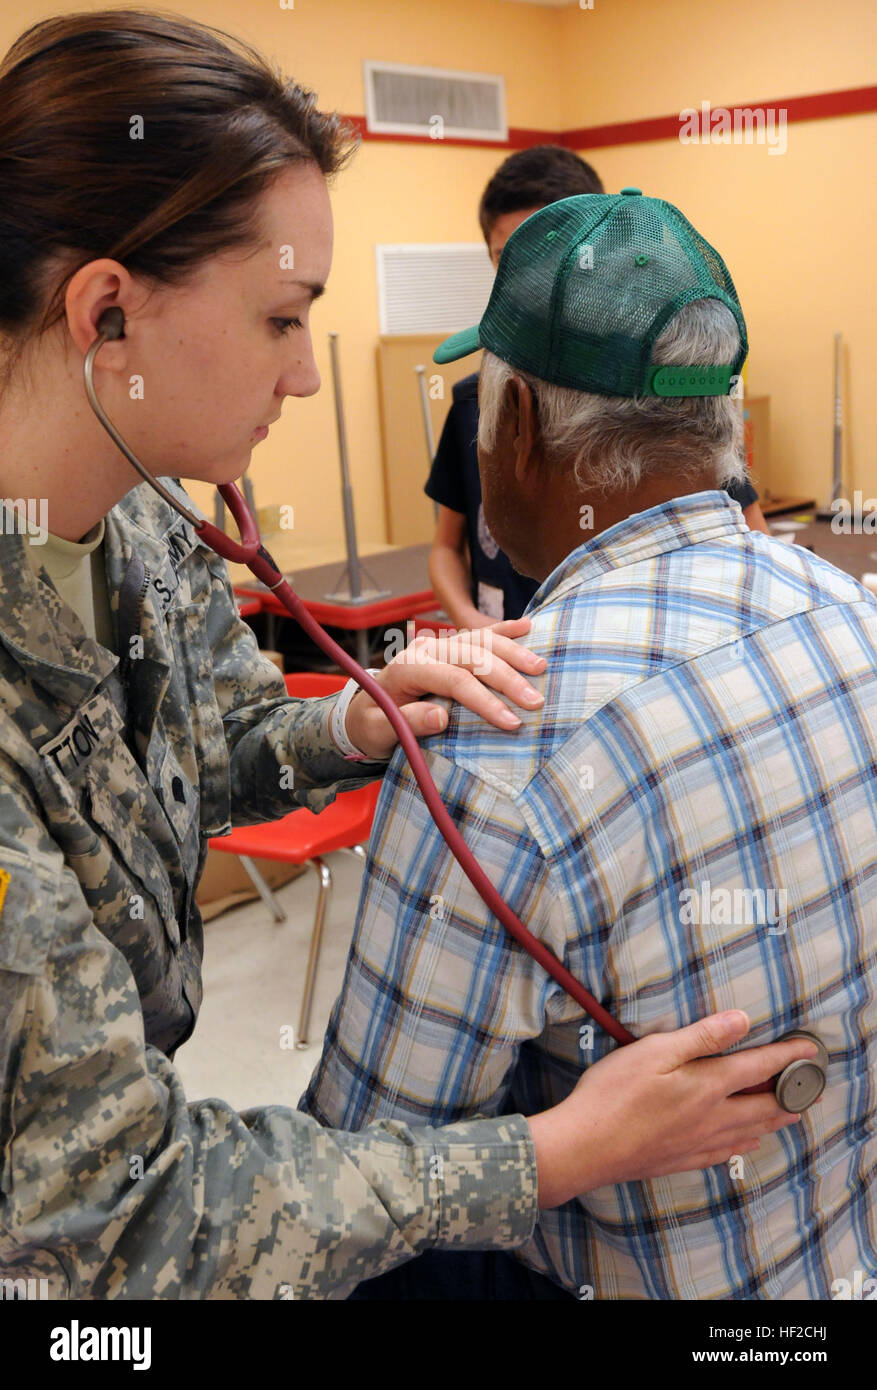 Spc. Amanda Patton, Texas Medical Command, Texas Army National Guard, performs a physical examination on a patient during Operation Lone Star in Rio Grande City, Texas, Aug. 5, 2014. Operation Lone Star is an emergency preparedness exercise conducted by the Texas Department of State Health Services, the Texas Military Forces, local and state organizations and volunteers to help them prepare for natural and man-made disasters. The operation also provides basic physical health assessments, routine vaccinations, vision screenings, and other services to area residents throughout the Rio Grande Val Stock Photo